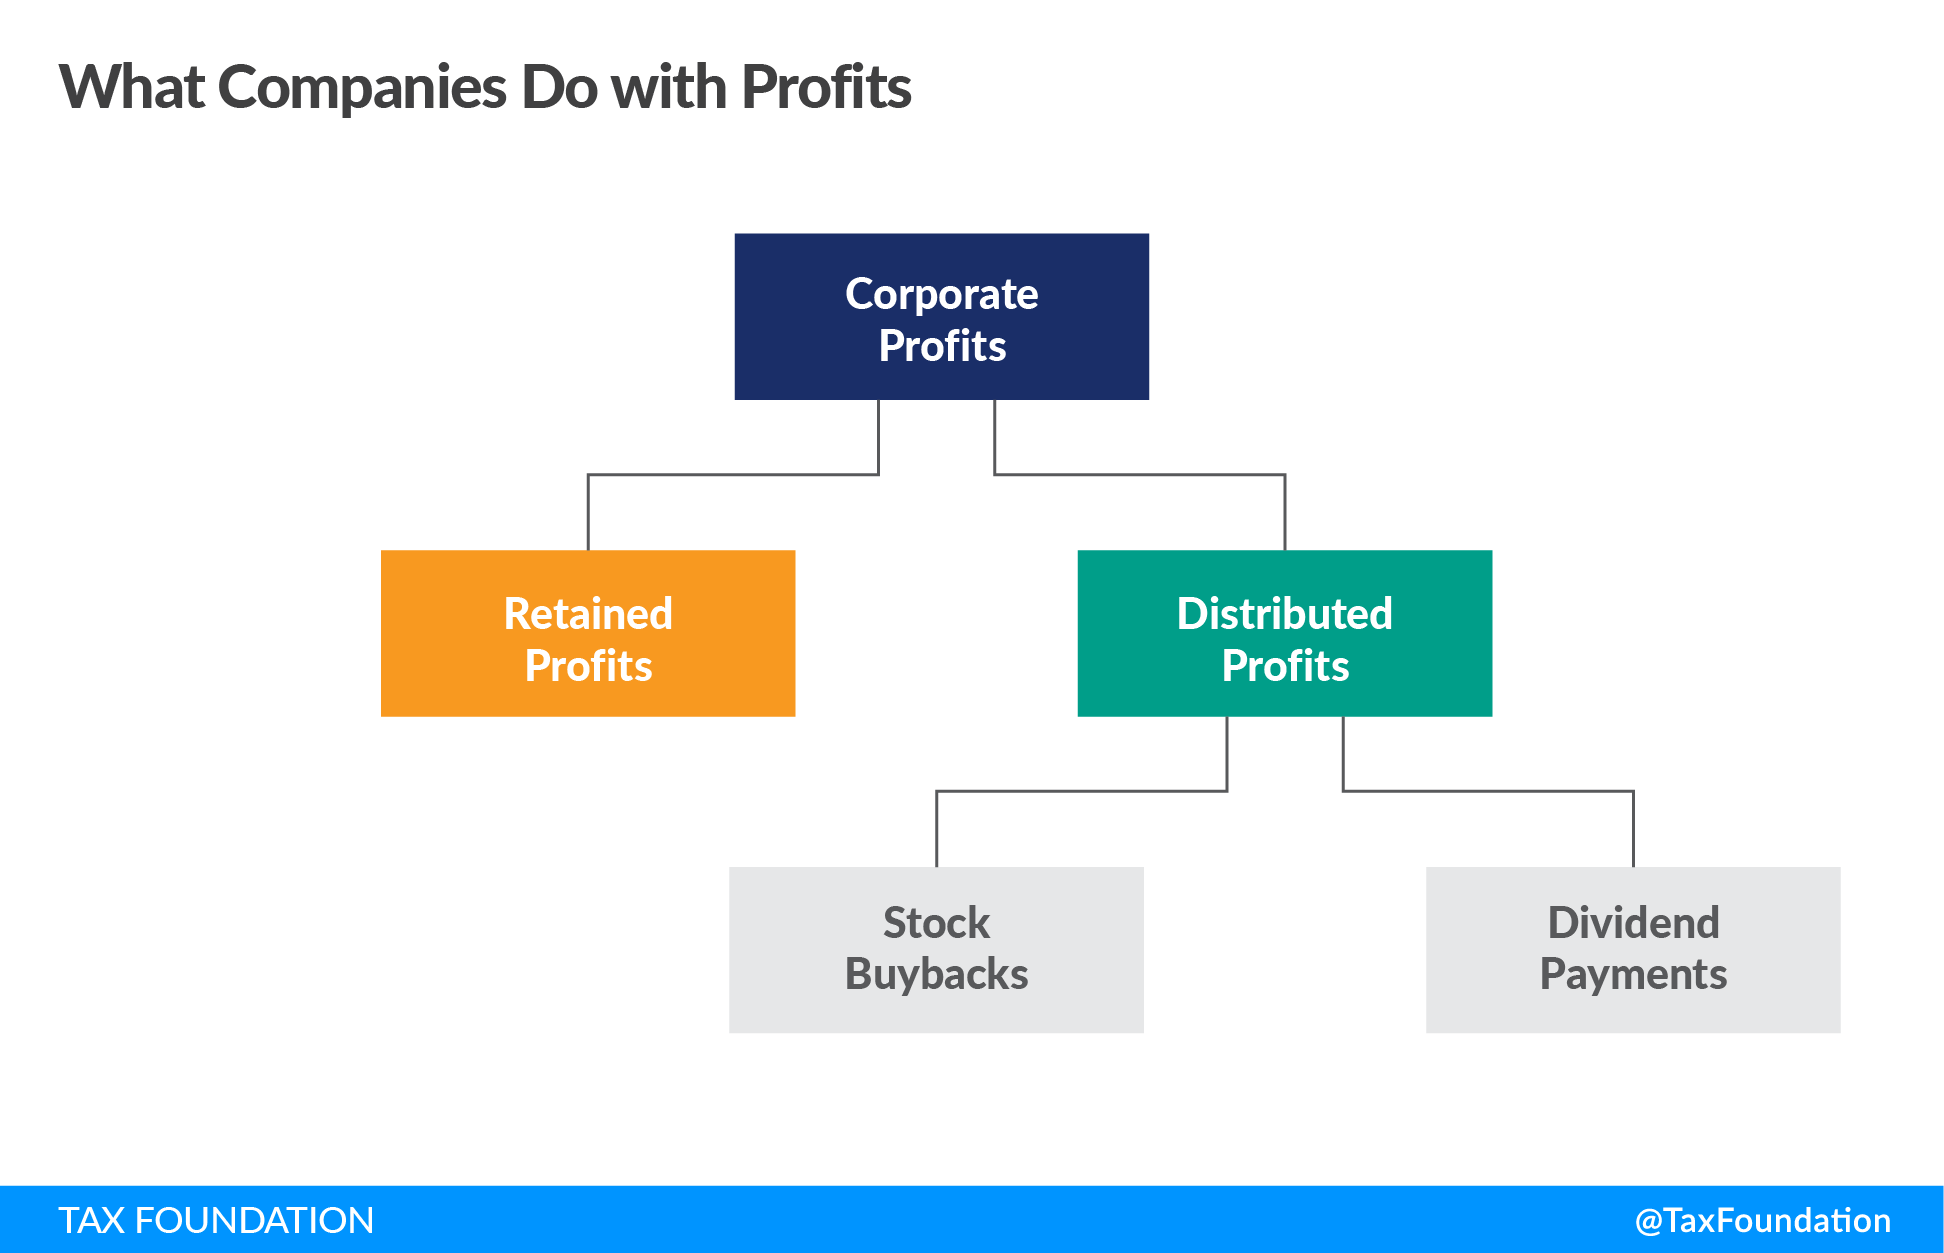 What Companies Do with Profits, including retained profits versus distributed profits like Biden stock buybacks tax and dividend payments